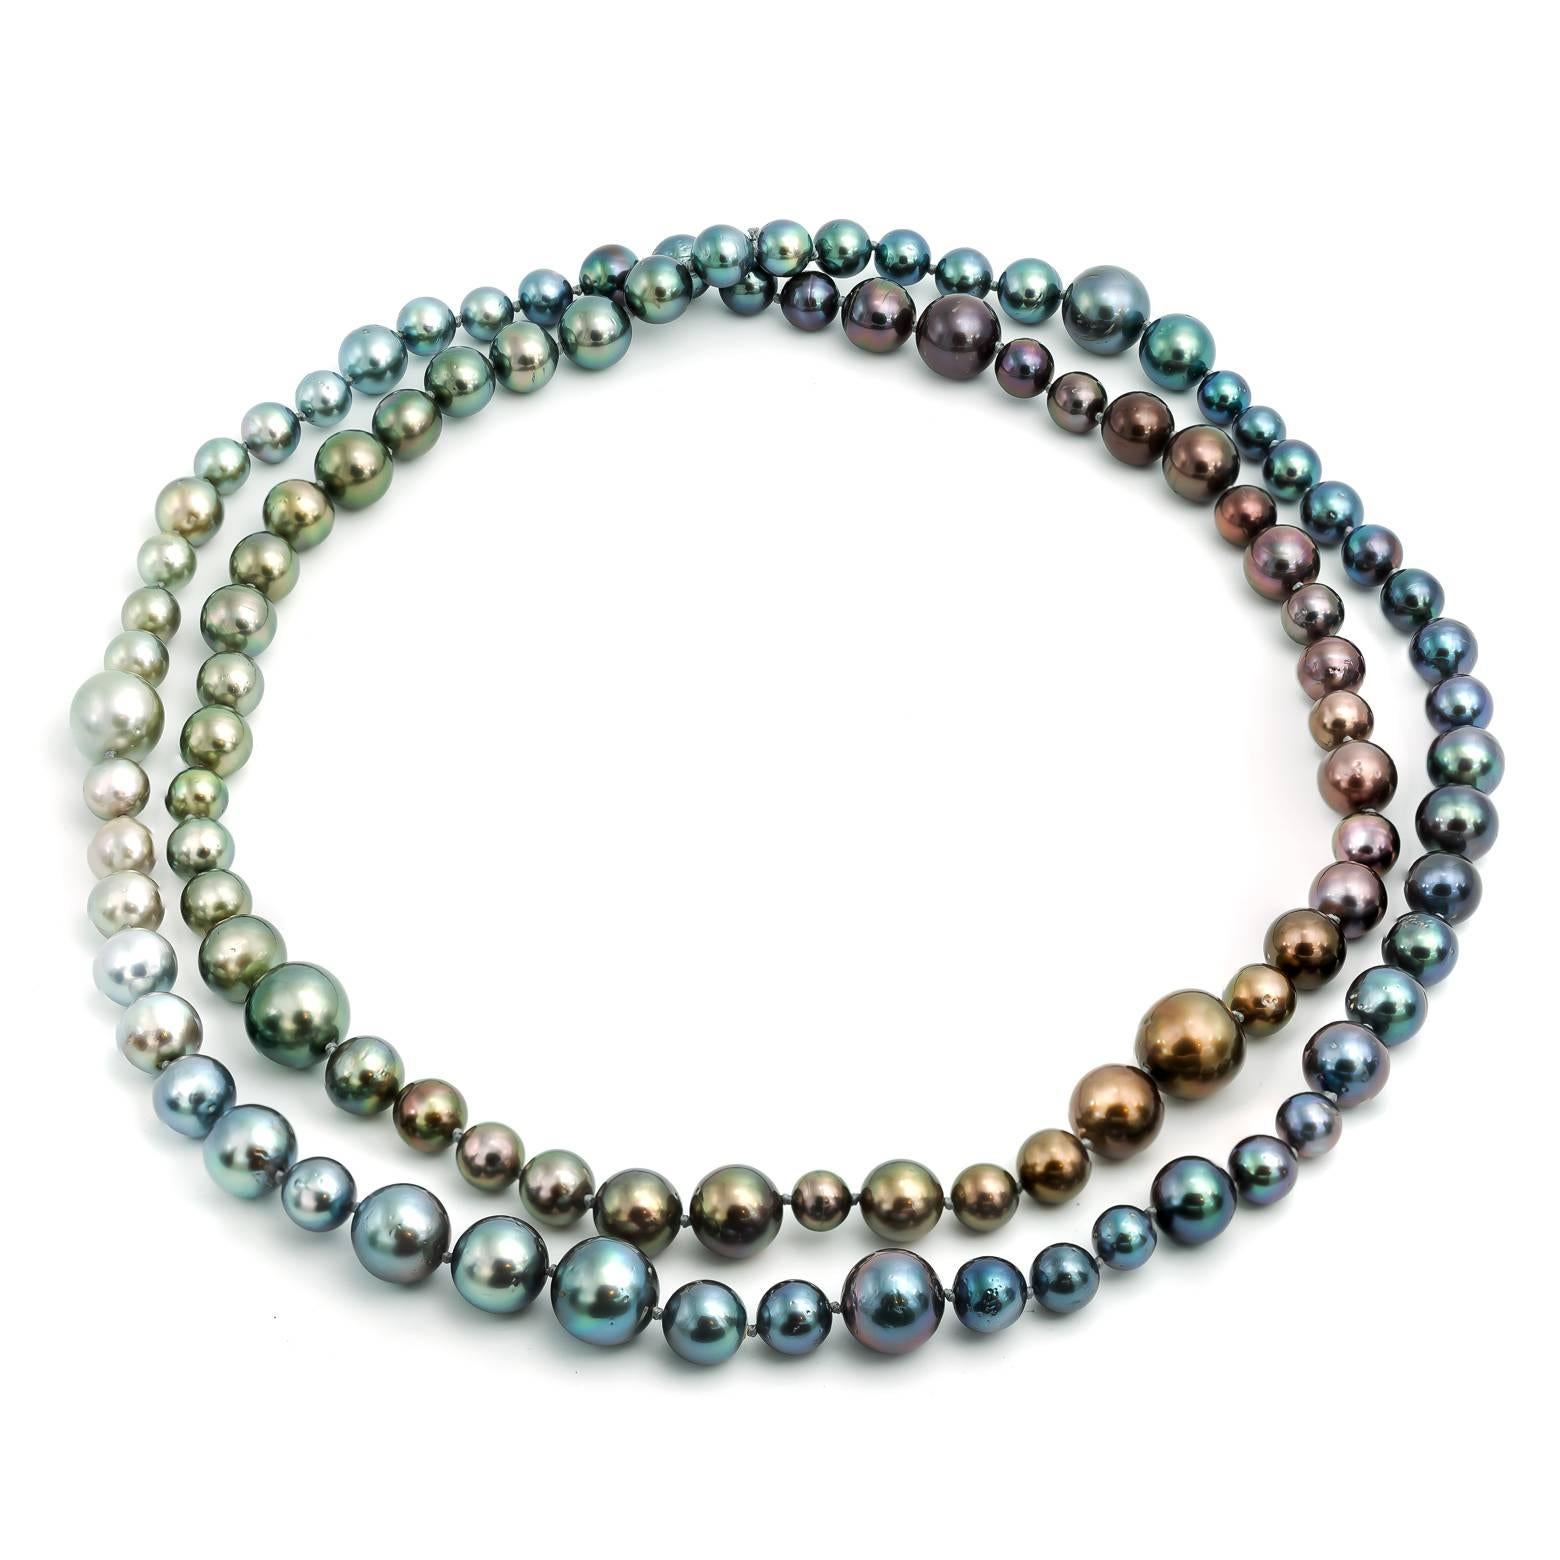 Modern Long Tahitian South Sea Rainbow Pearl Necklace in Every Natural Color